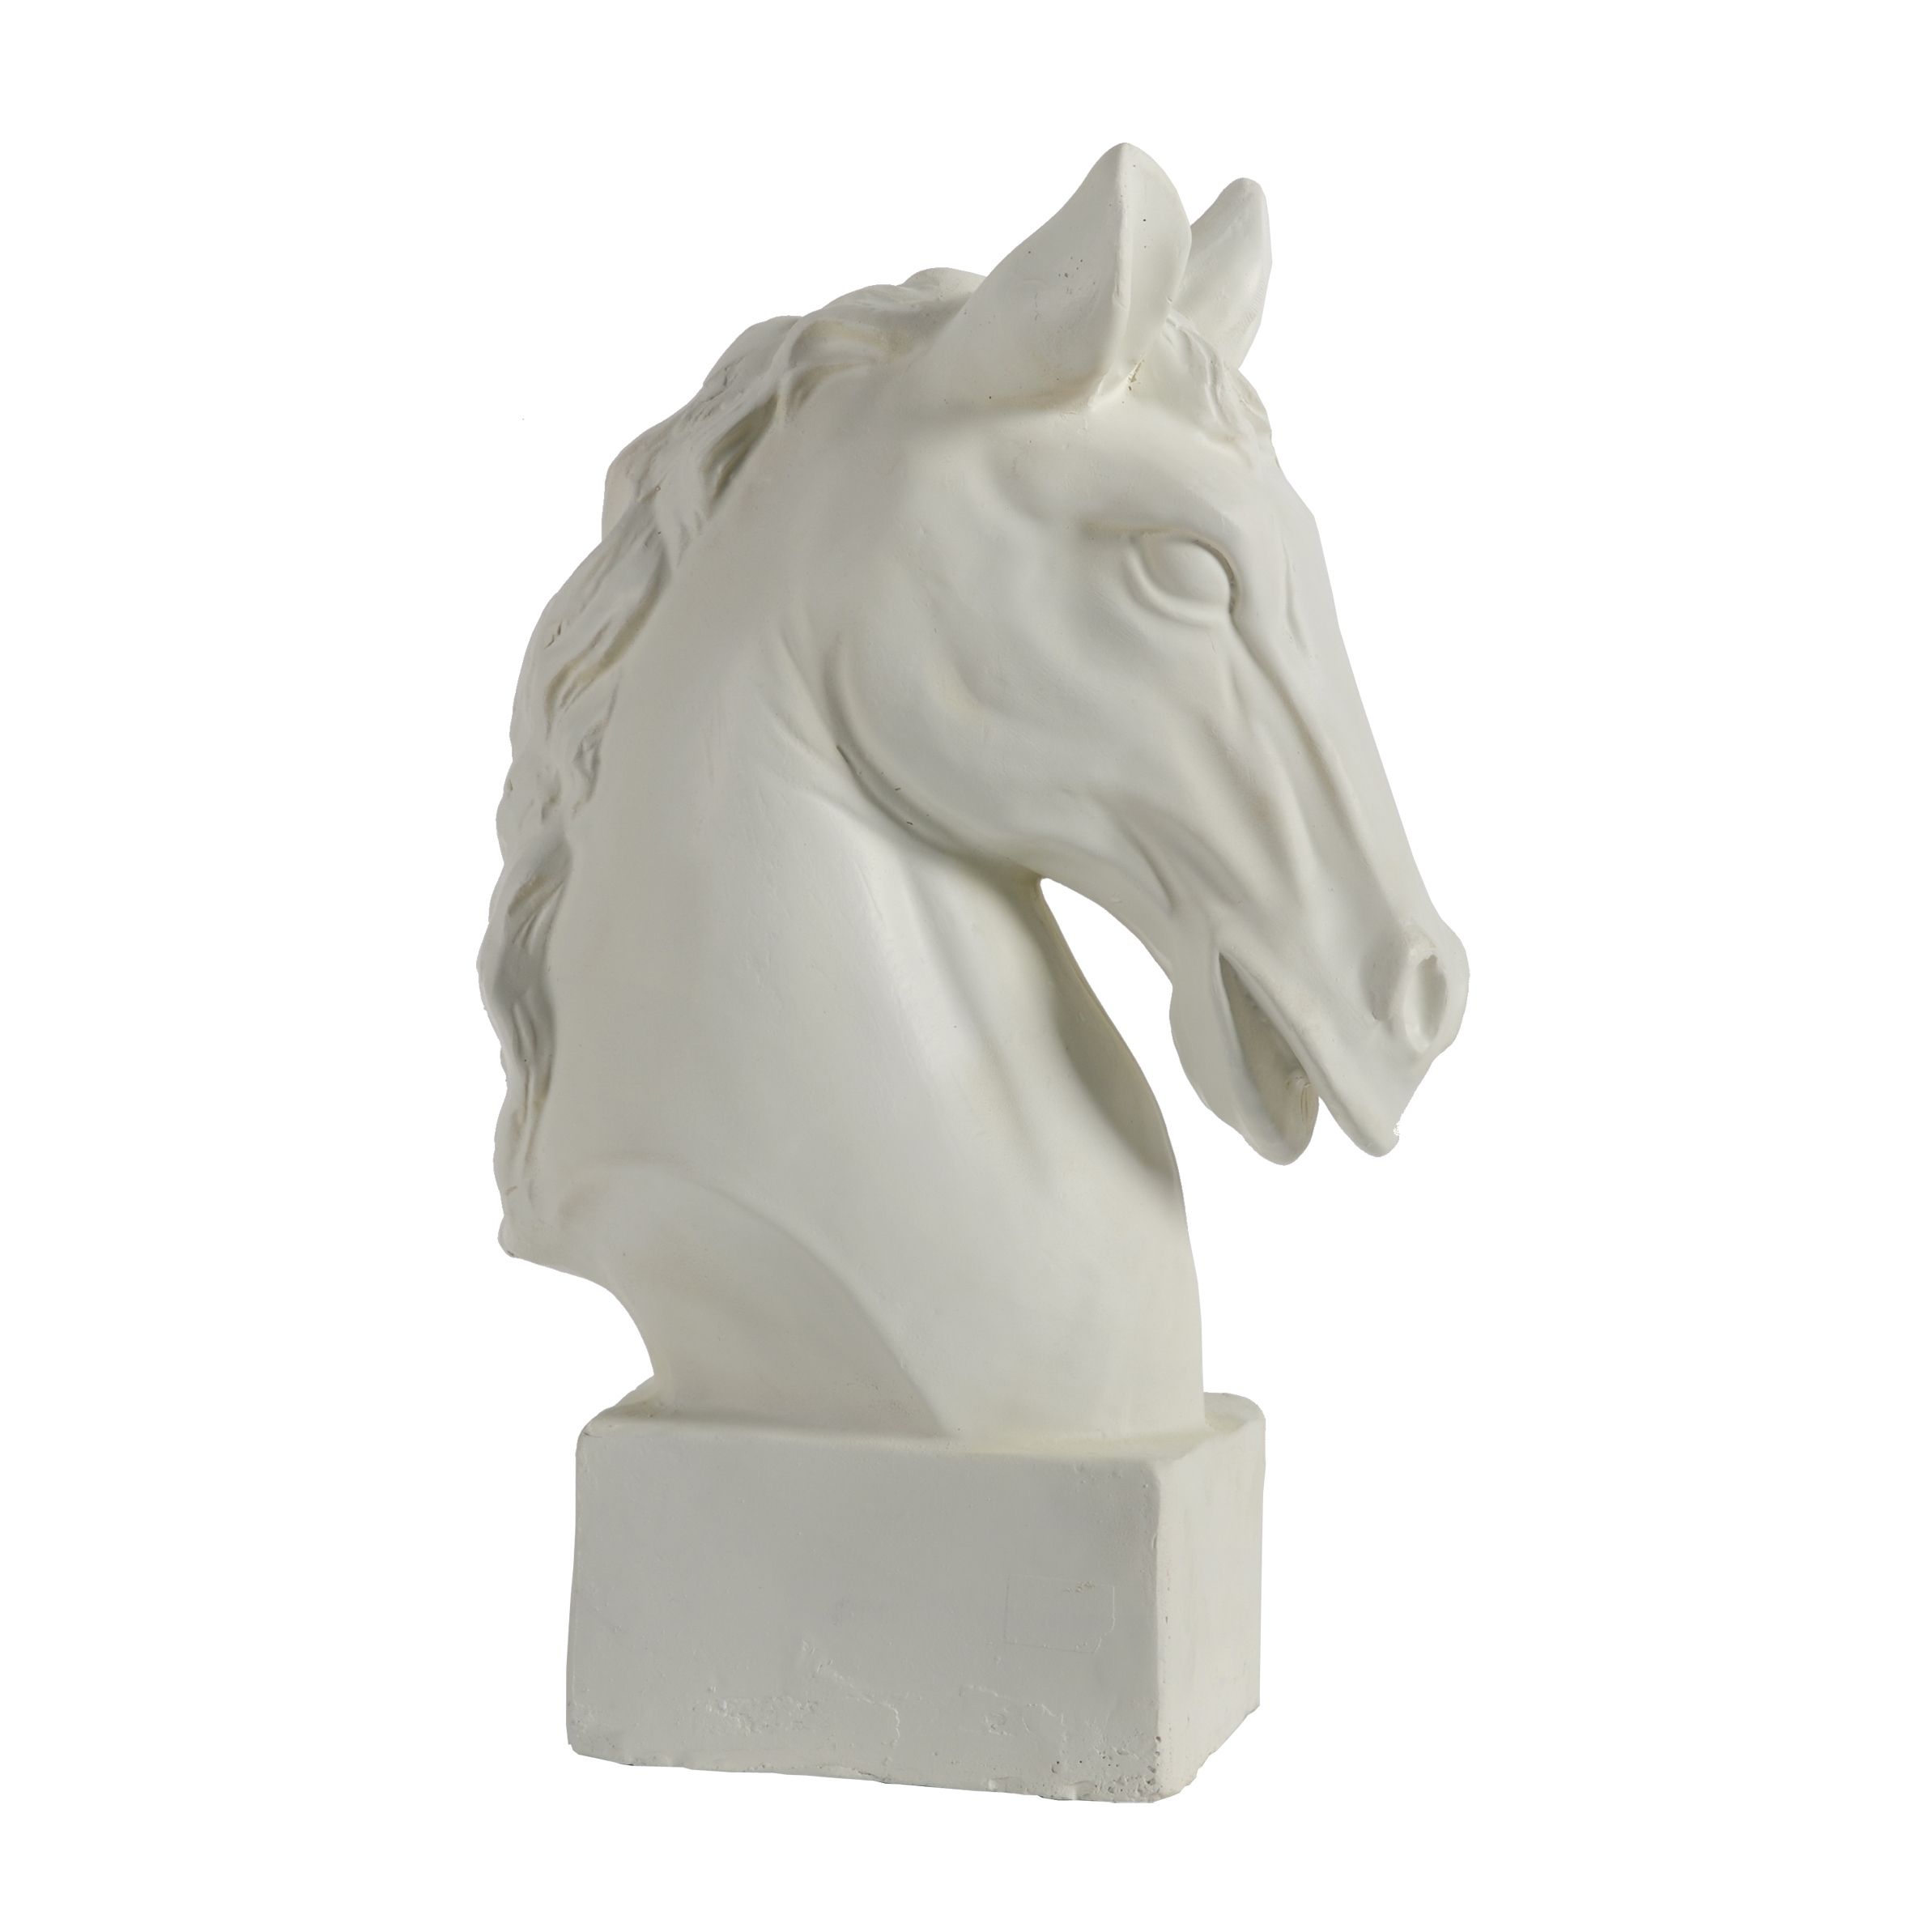 Buy Statues & Sculptures Online at Overstock | Our Best Decorative Accessories Deals | Bed Bath & Beyond